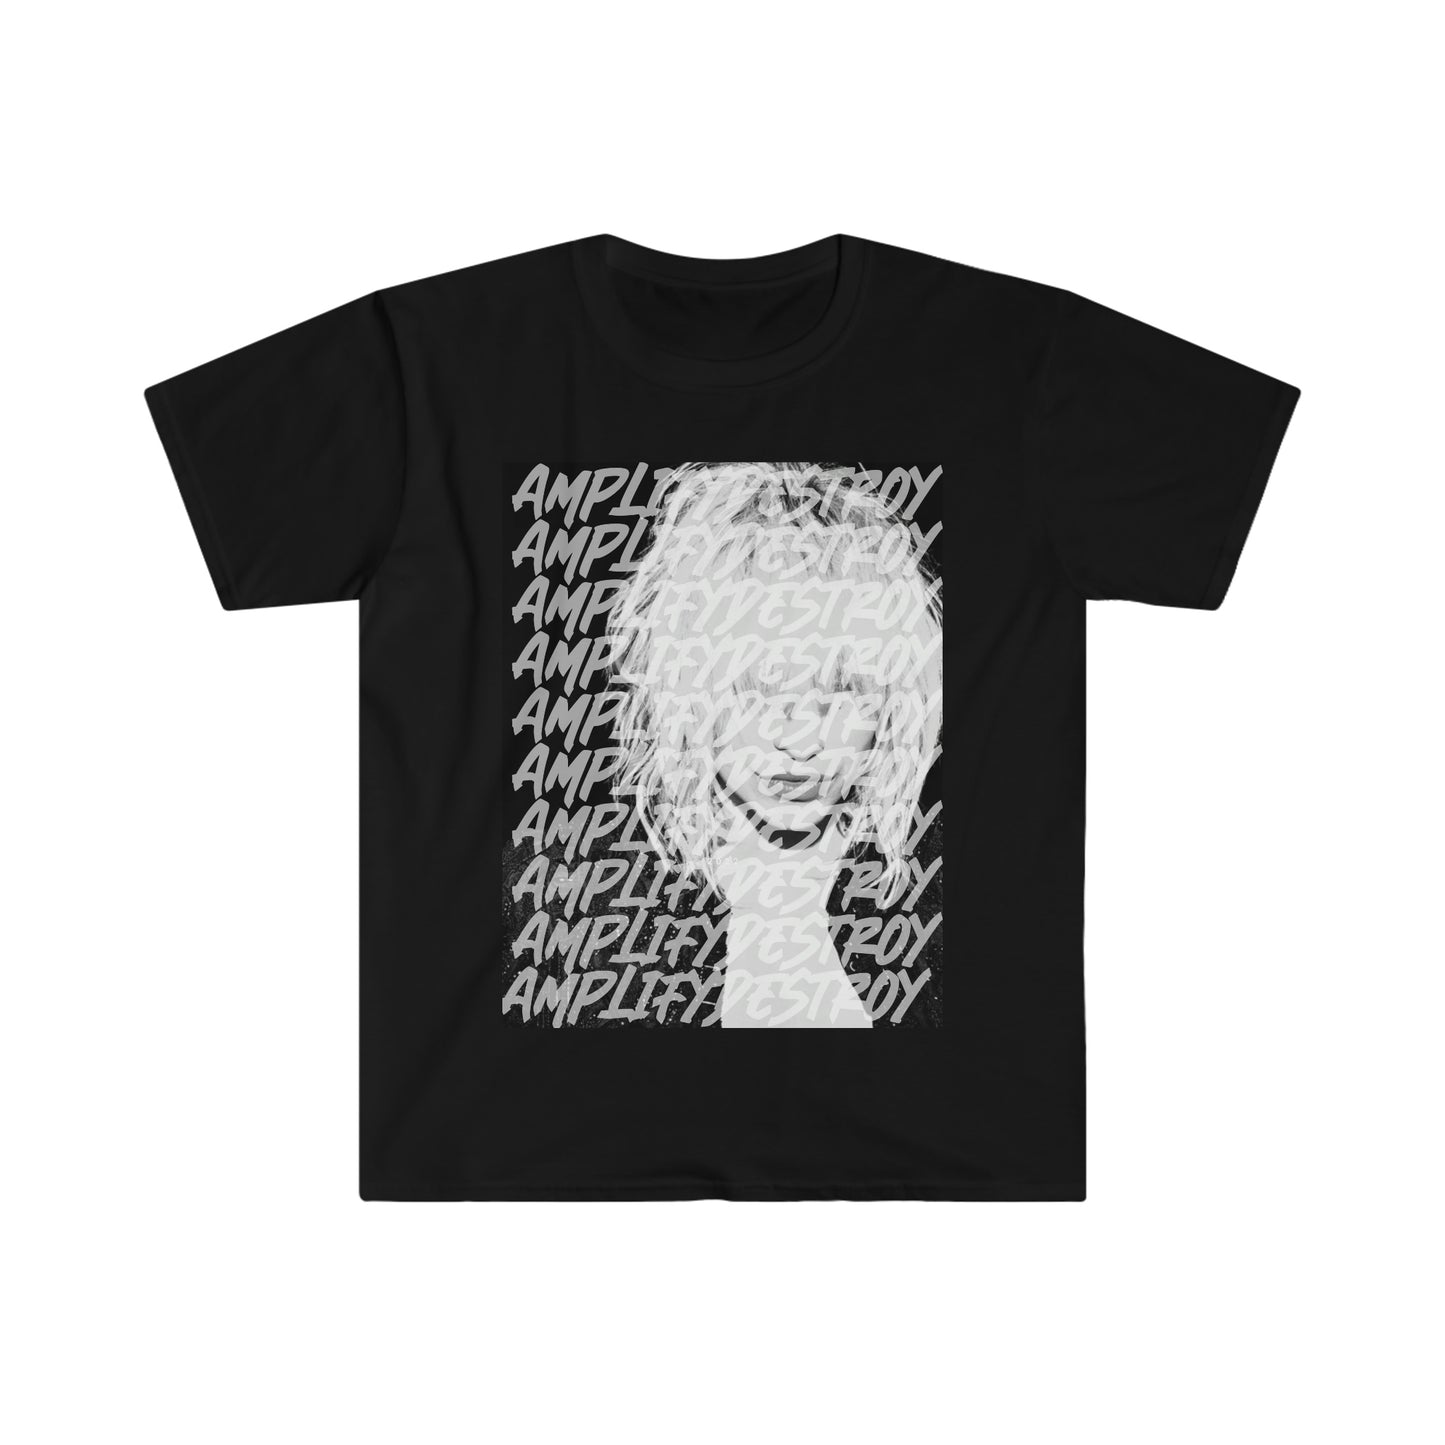 COURTNEY Classic Fit AmplifyDestroy Print Tee Shirt